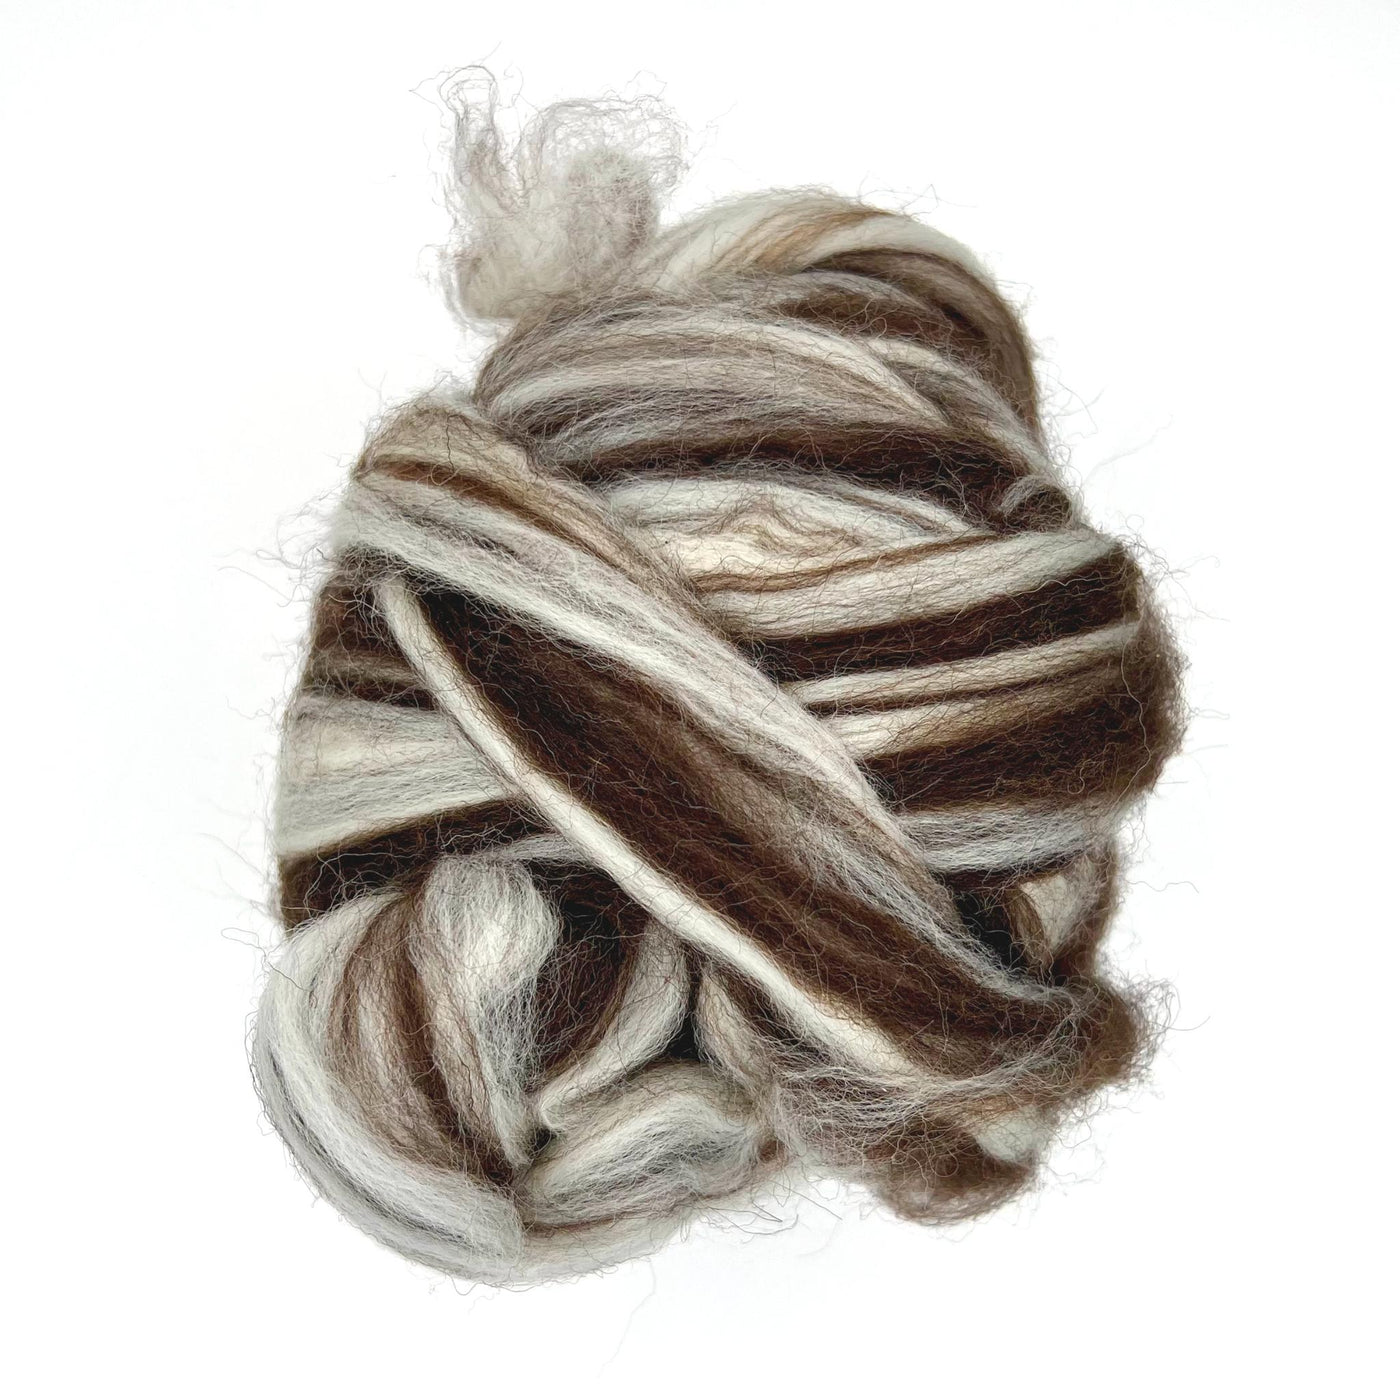 Yin Yang Corriedale Undyed Blend Wool Roving Tops